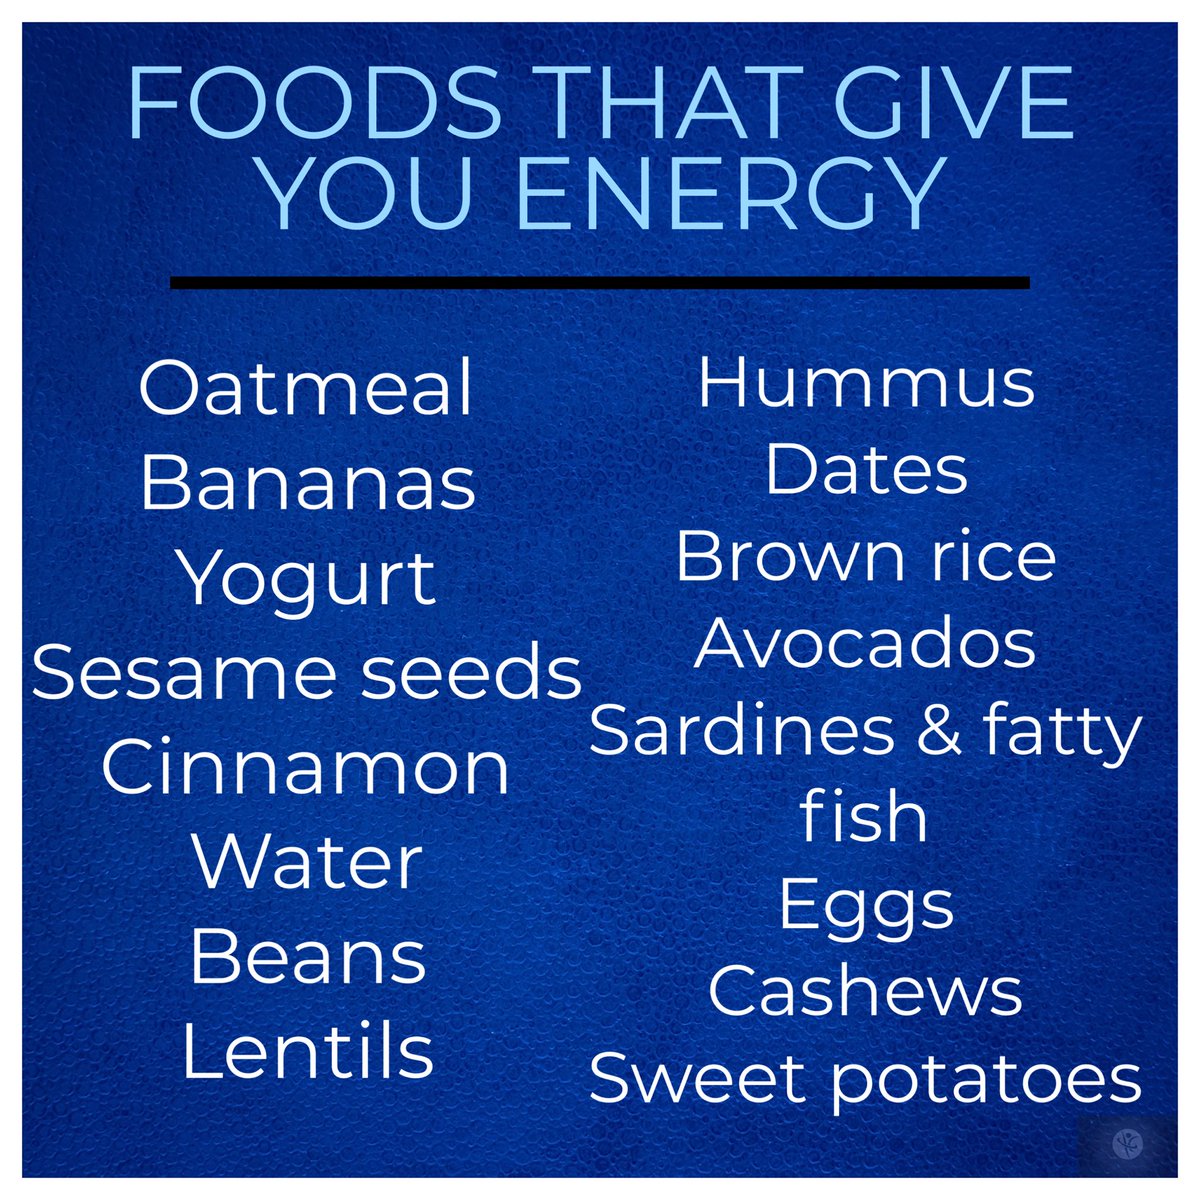 Thankful & Blessed Friday! integrisok.com/resources/on-y… Thank you, CM/Project Health & Wellness, LLC #health #energyiseverything #foodismedicine #healthylifestyle #healthyeating #energy #wellness #holistichealth #nutrition #projecthealthandwellness #projecthealthandwellnessllc